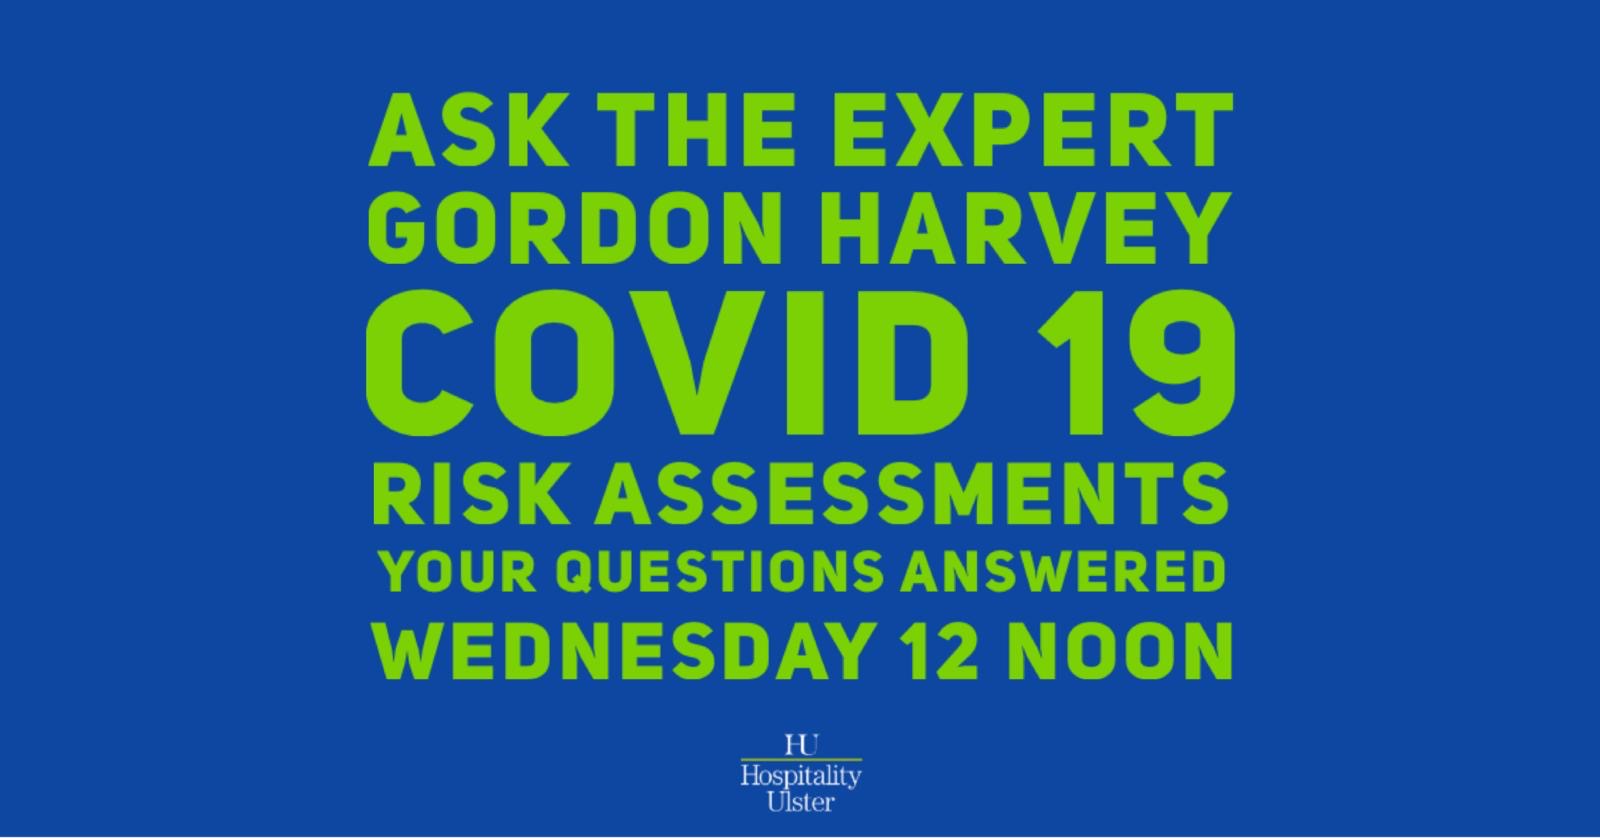 ASK THE EXPERT- COVID19 RISK ASSESSMENTS- WEDS 12 NOON ON FACEBOOK